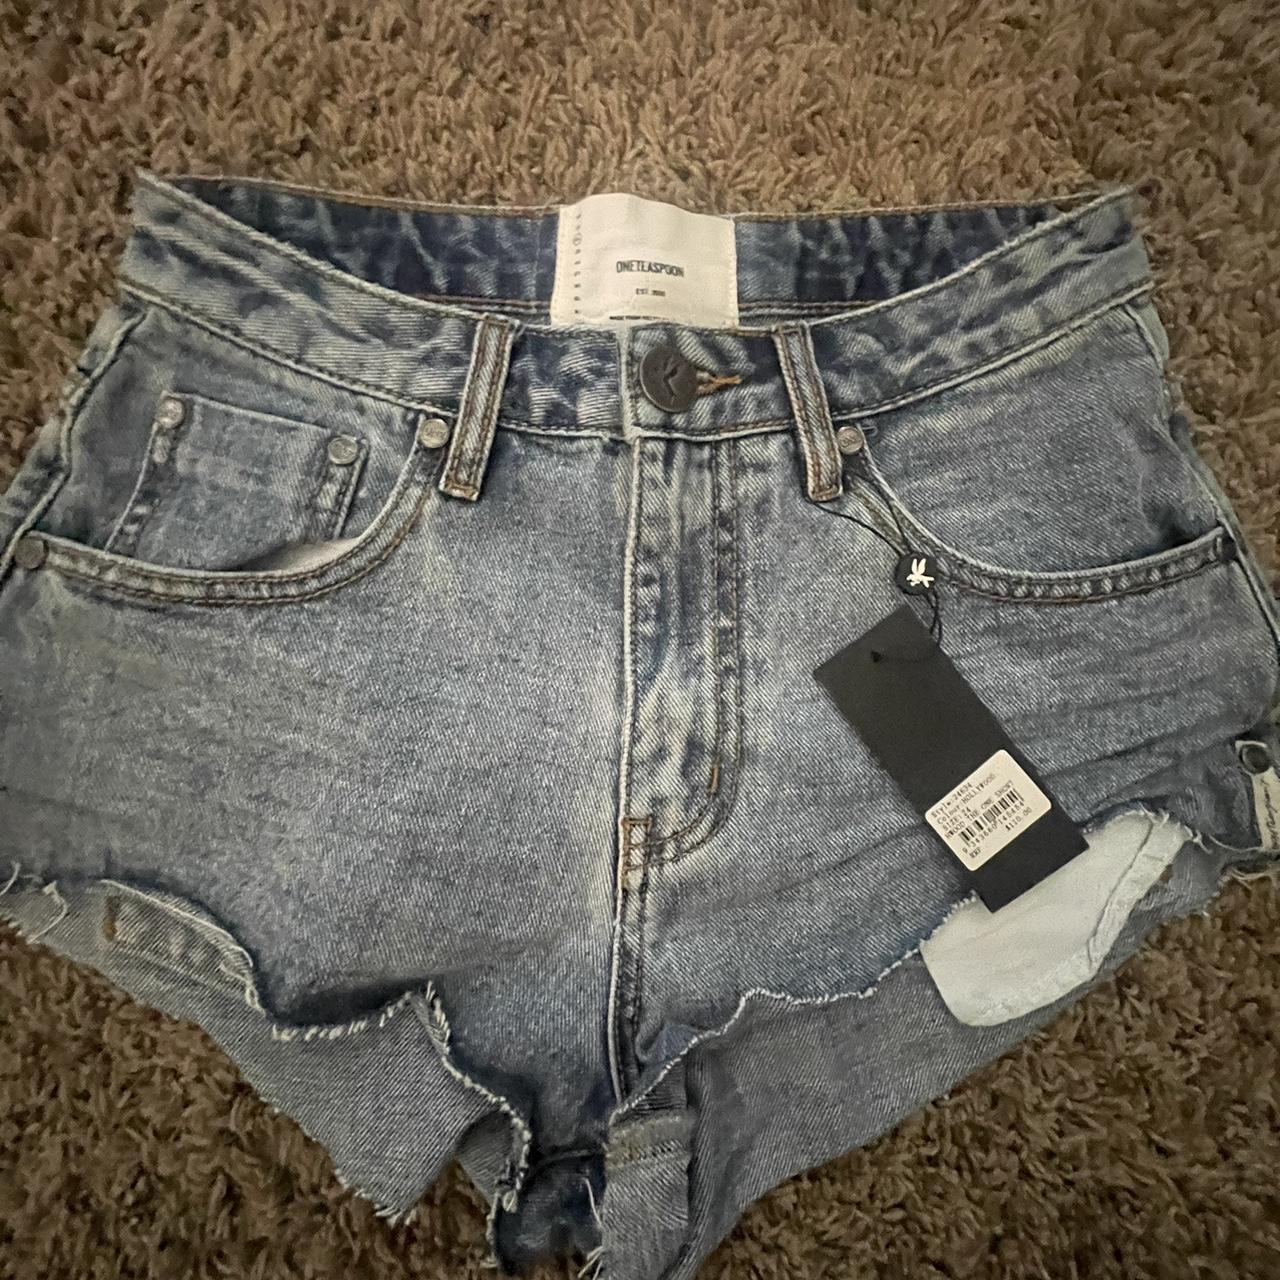 THE ONE FITTED CHEEKY DENIM SHORT